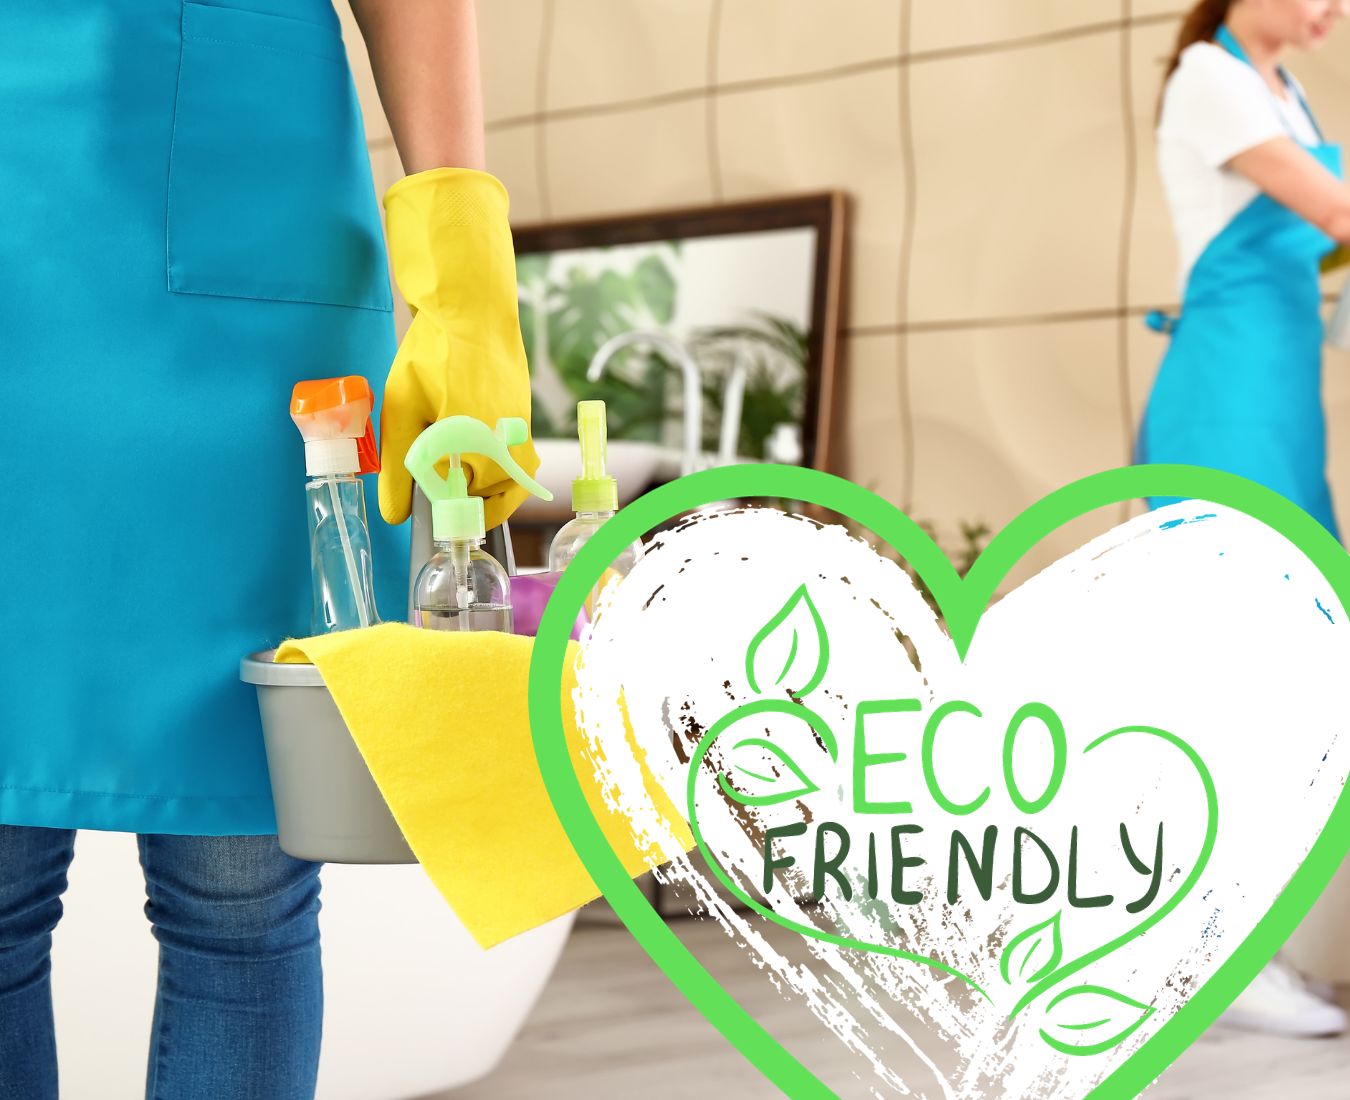 How Do I Start an Eco-friendly Cleaning Business?